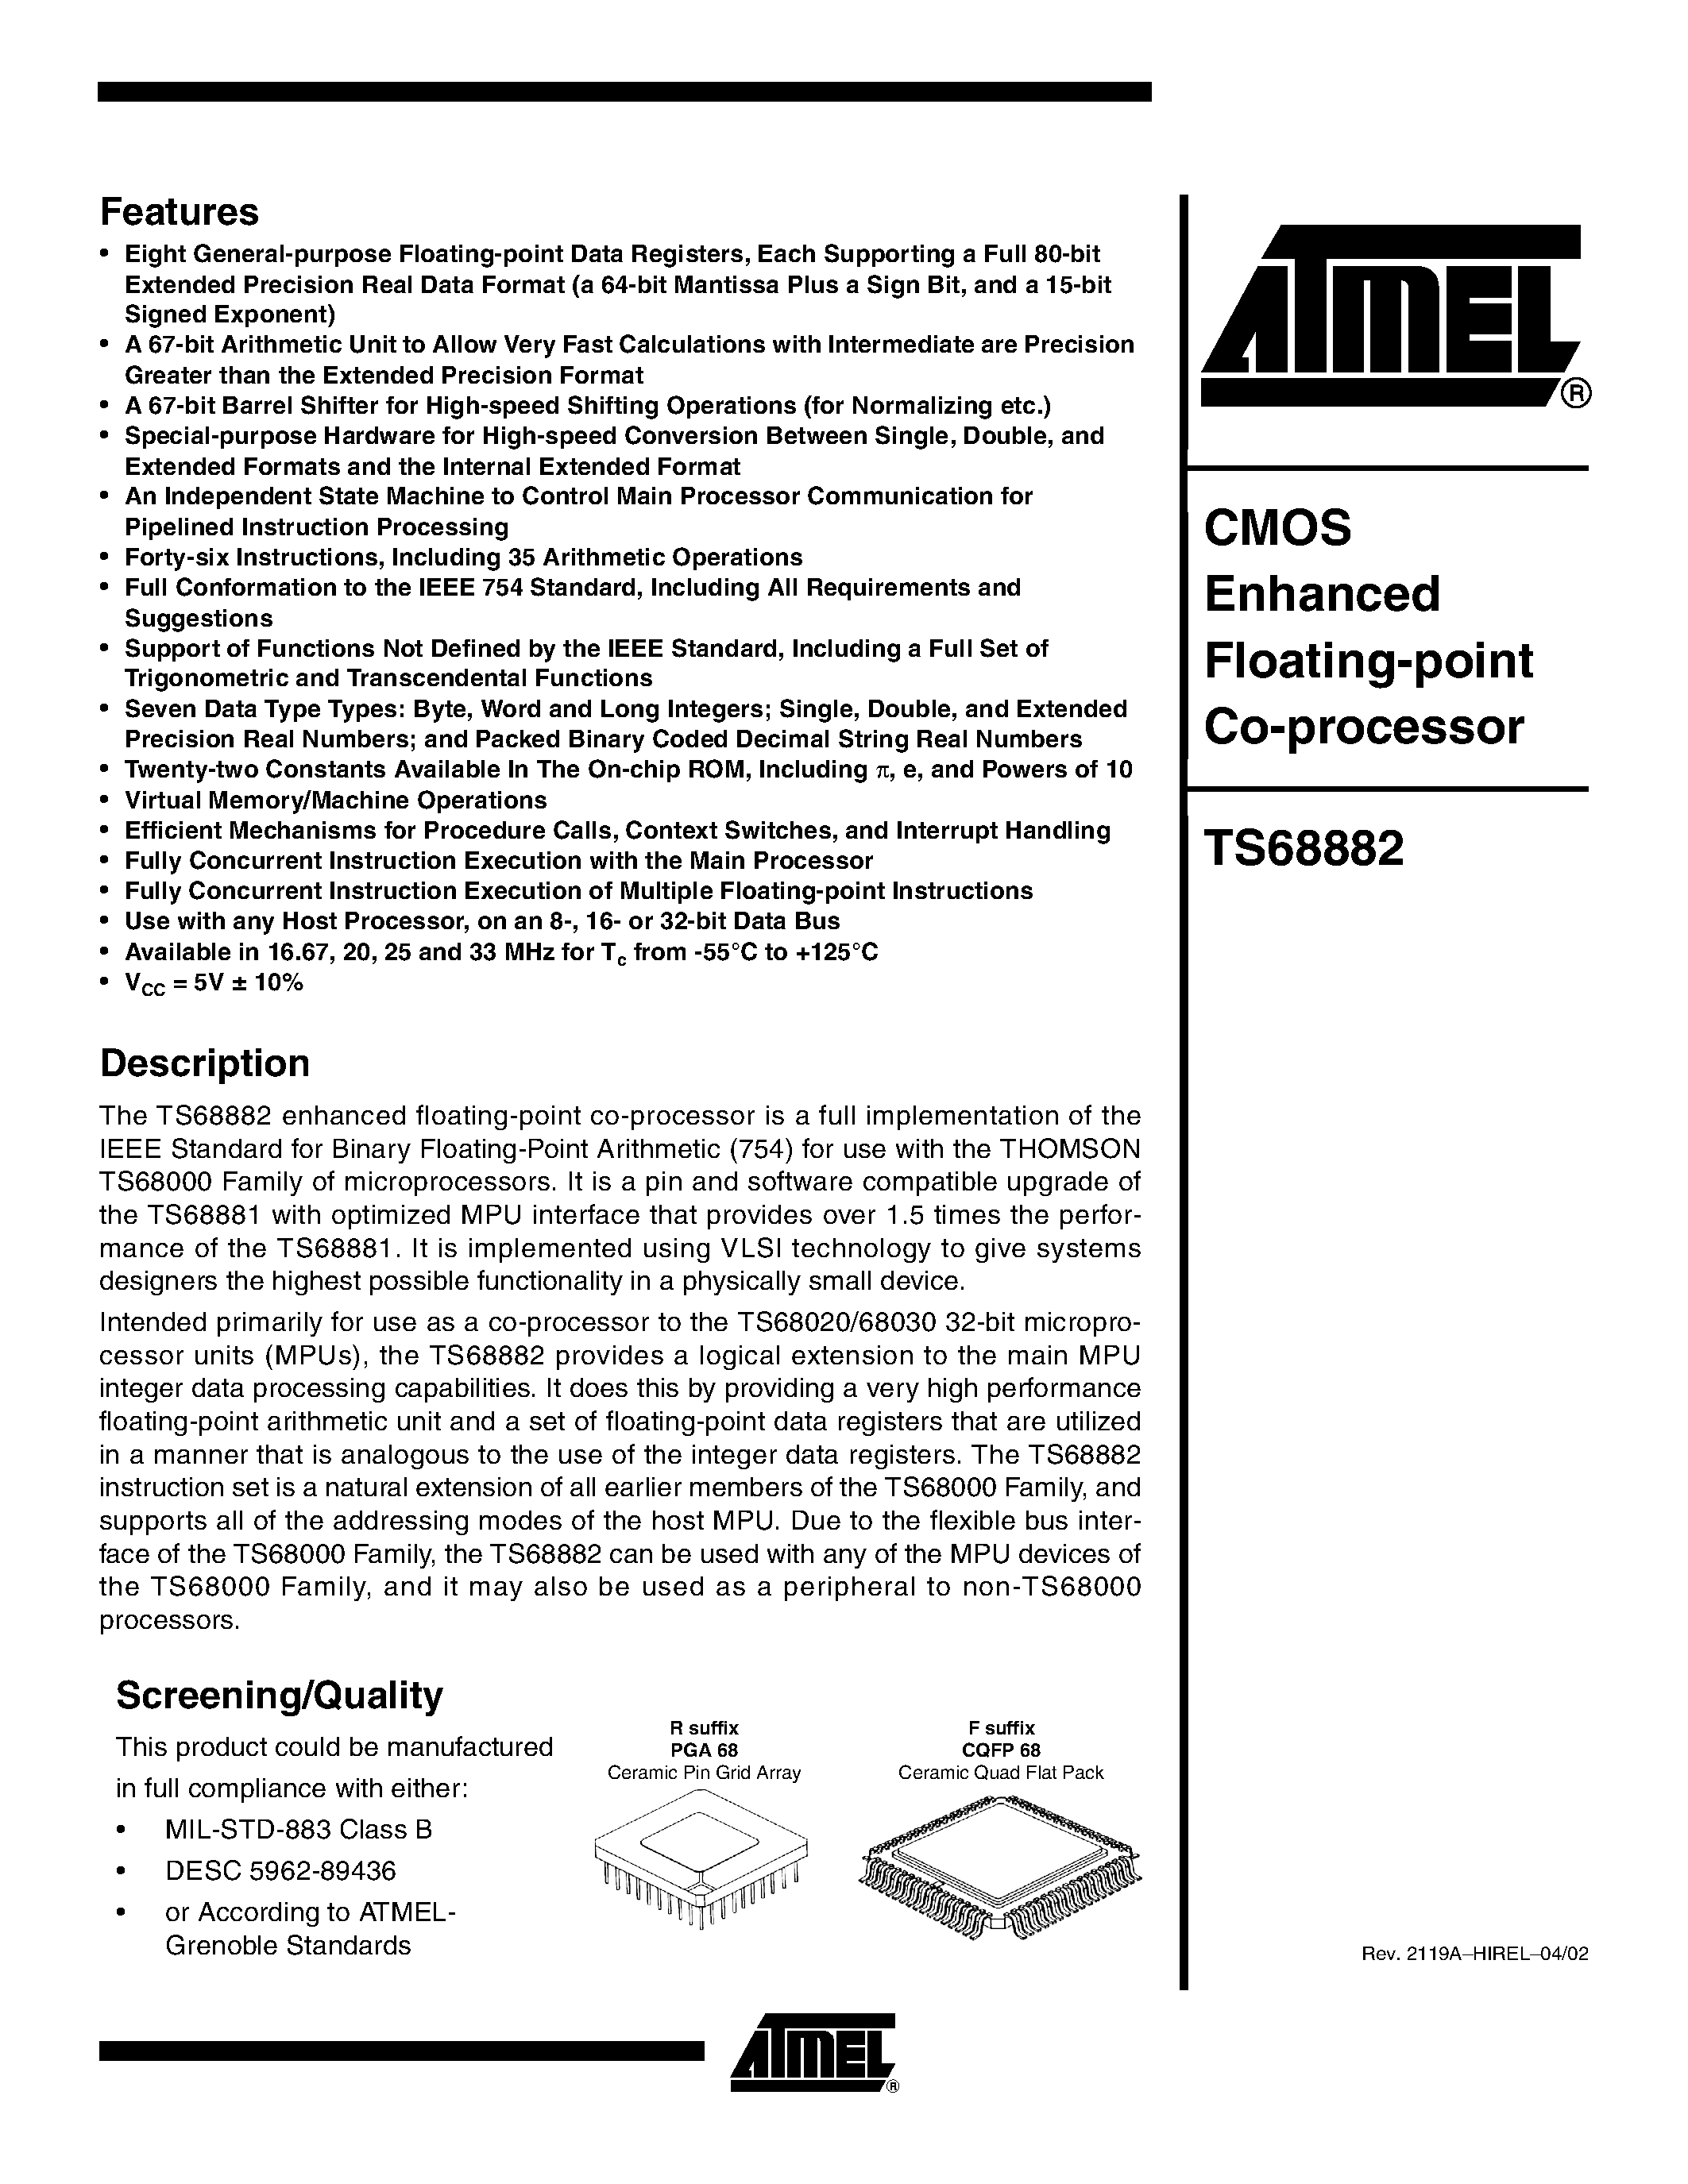 Datasheet TS68882VR16 - CMOS Enhanced Floating-point Co-processor page 1